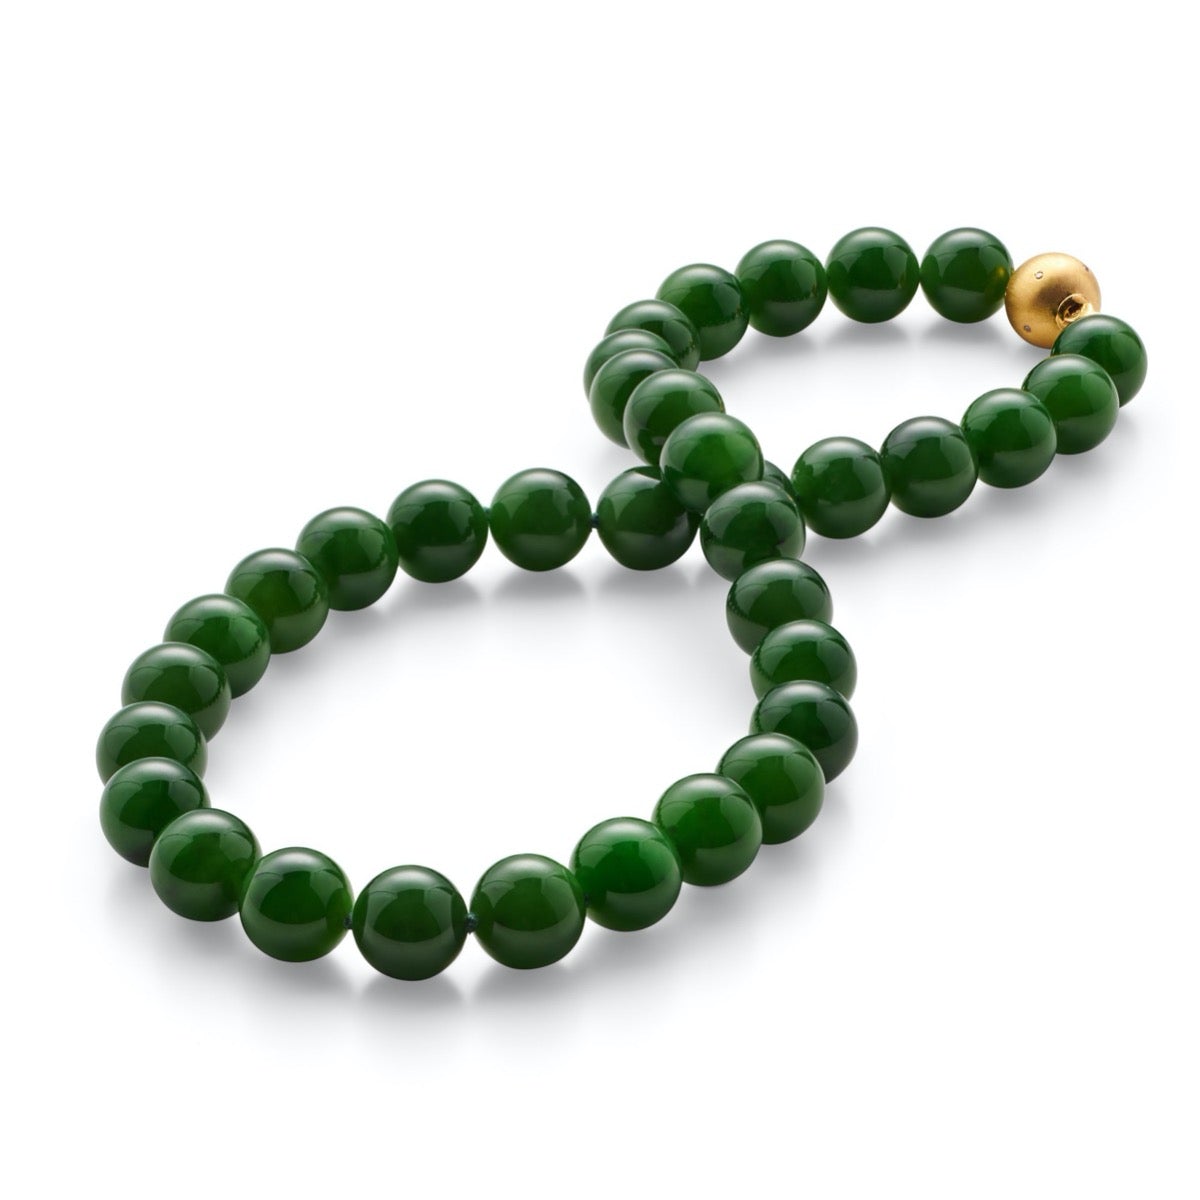 Sparkly Nephrite Jade Necklace | Jewellery Making Kit